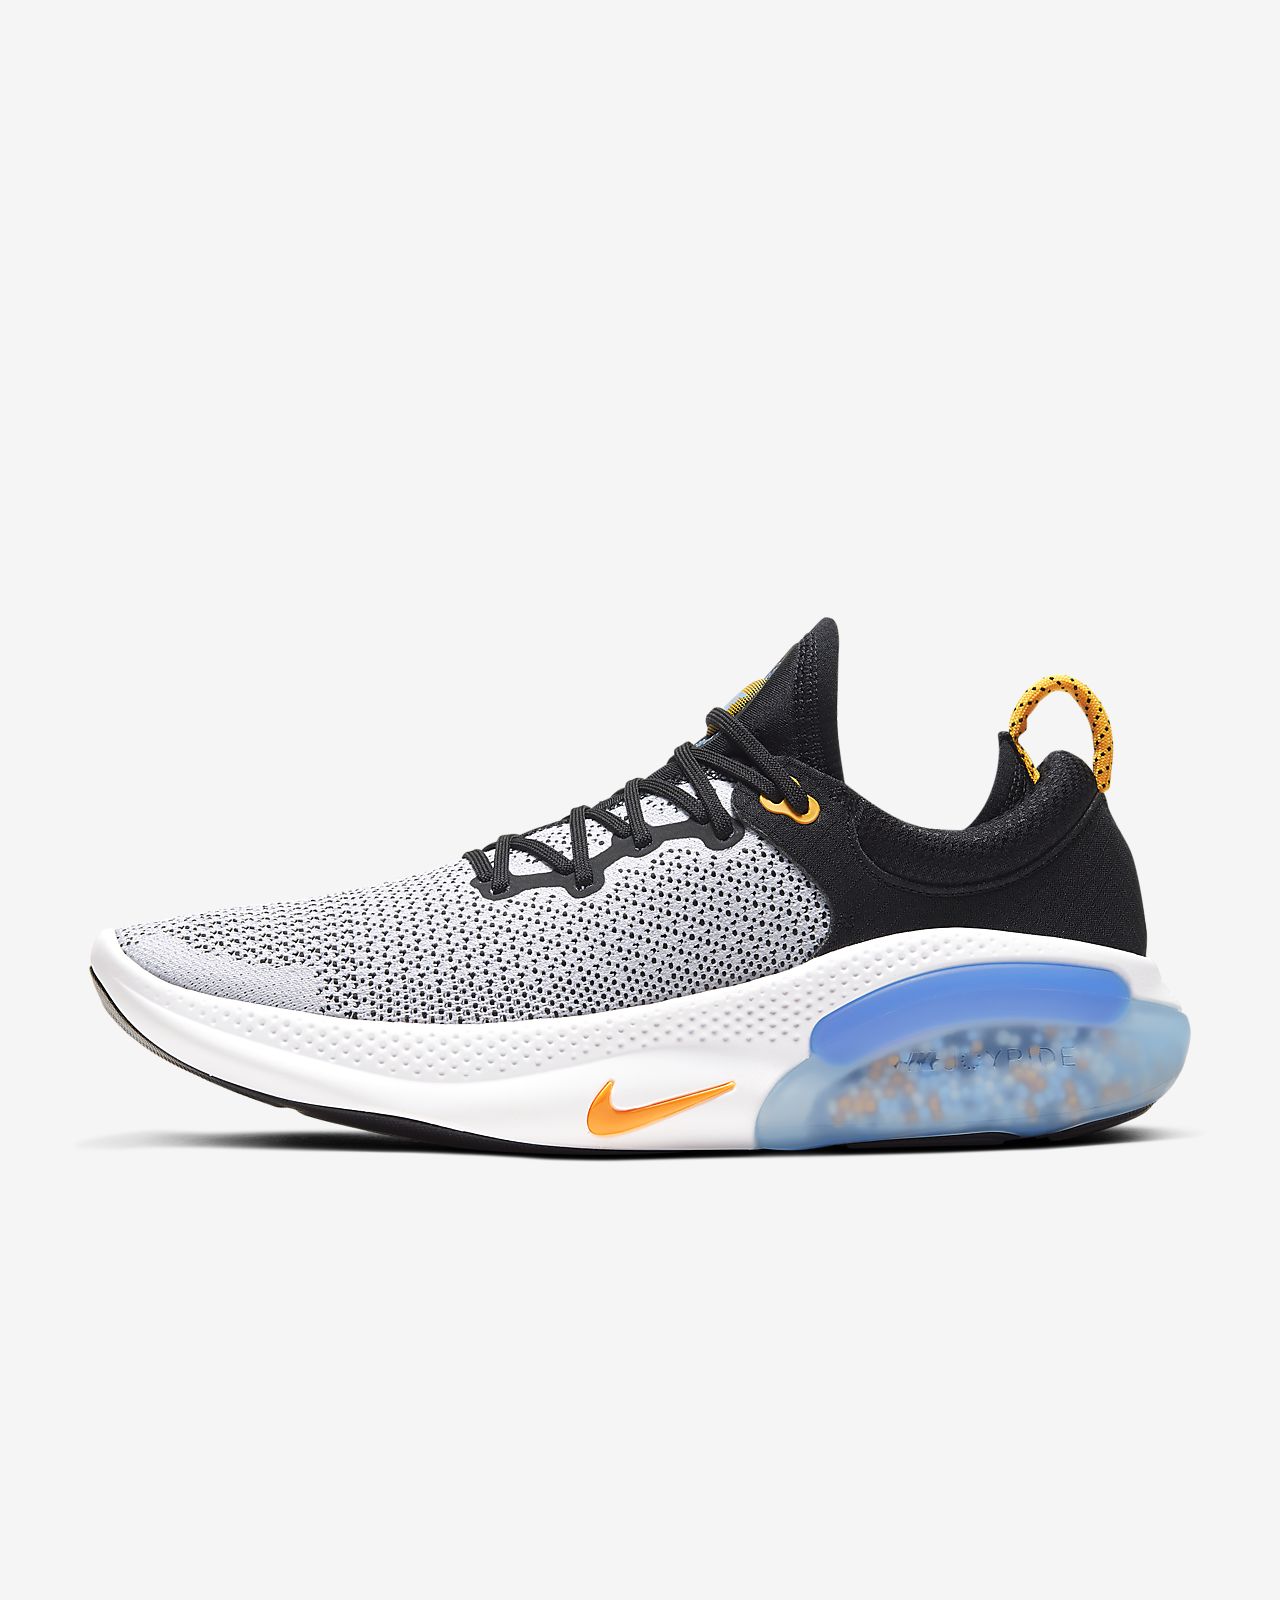 nike joyride shoes price in india